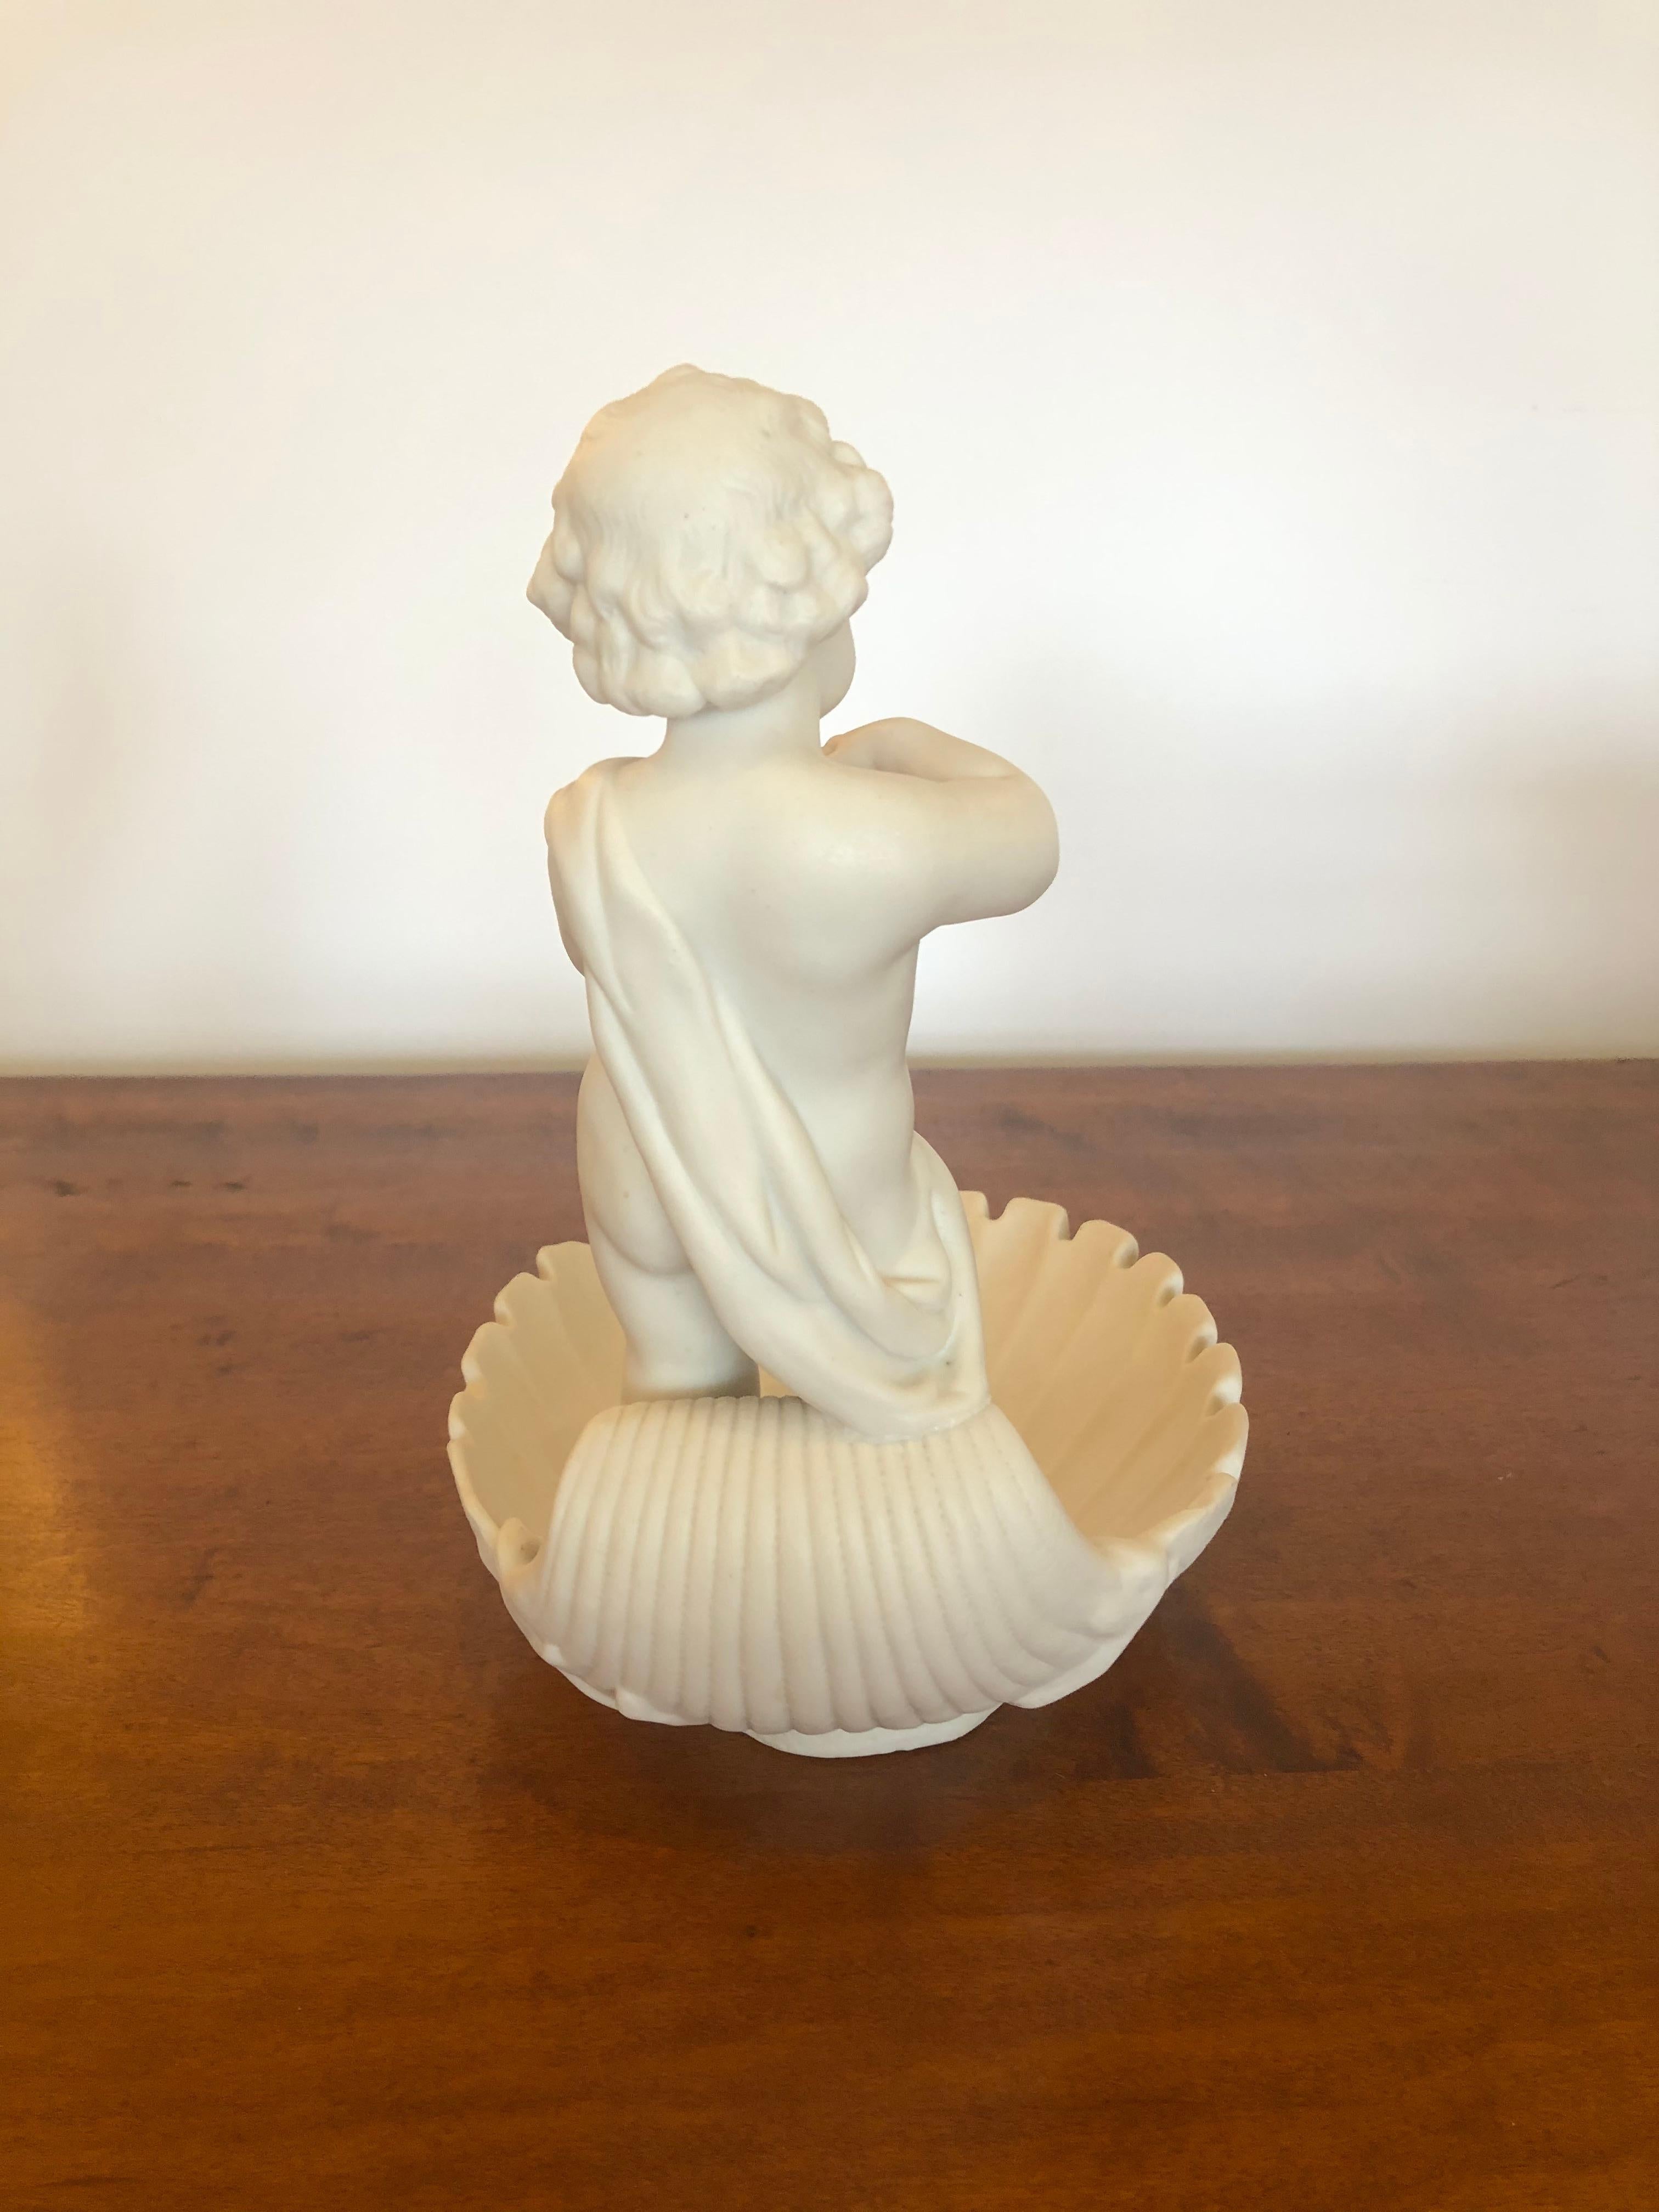 Magical Parian Porcelain Shell Motif Dish with Sculptural Putti For Sale 1